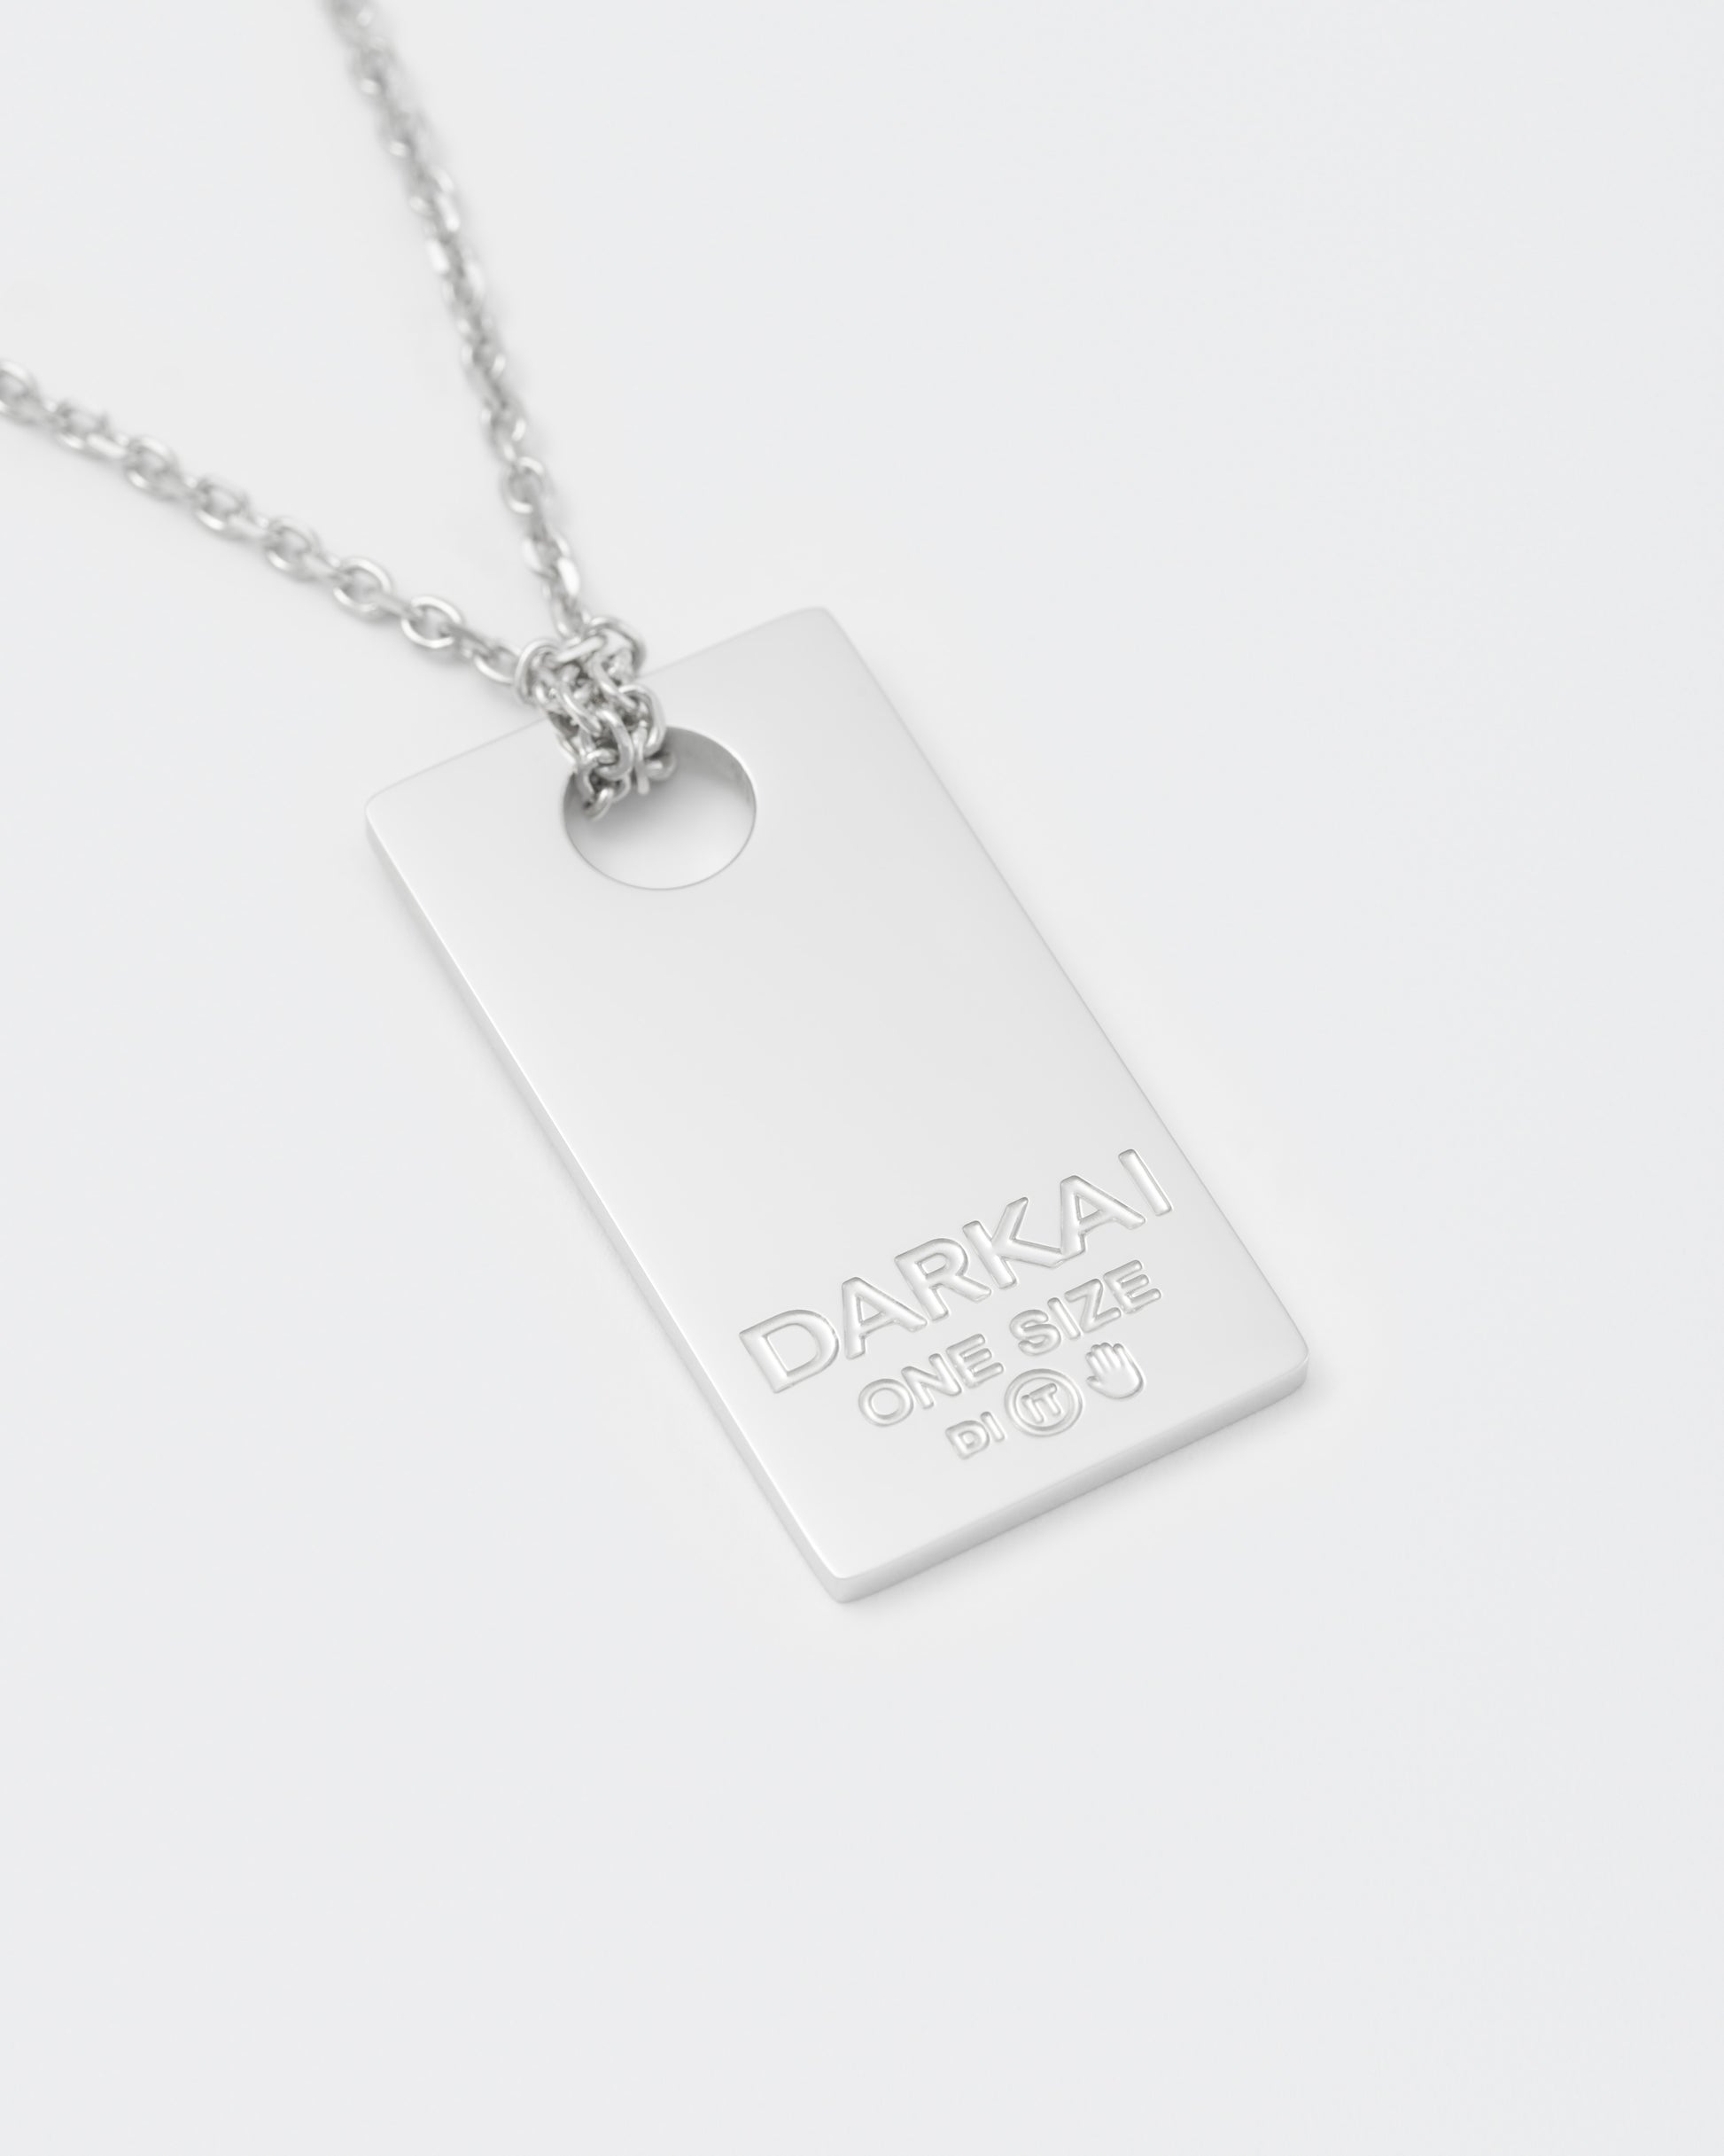 detail of size tag pendant necklace with 18kt white gold coating with lasered logo and details. 2mm cable chain and lobster clasp with metal logo tag.